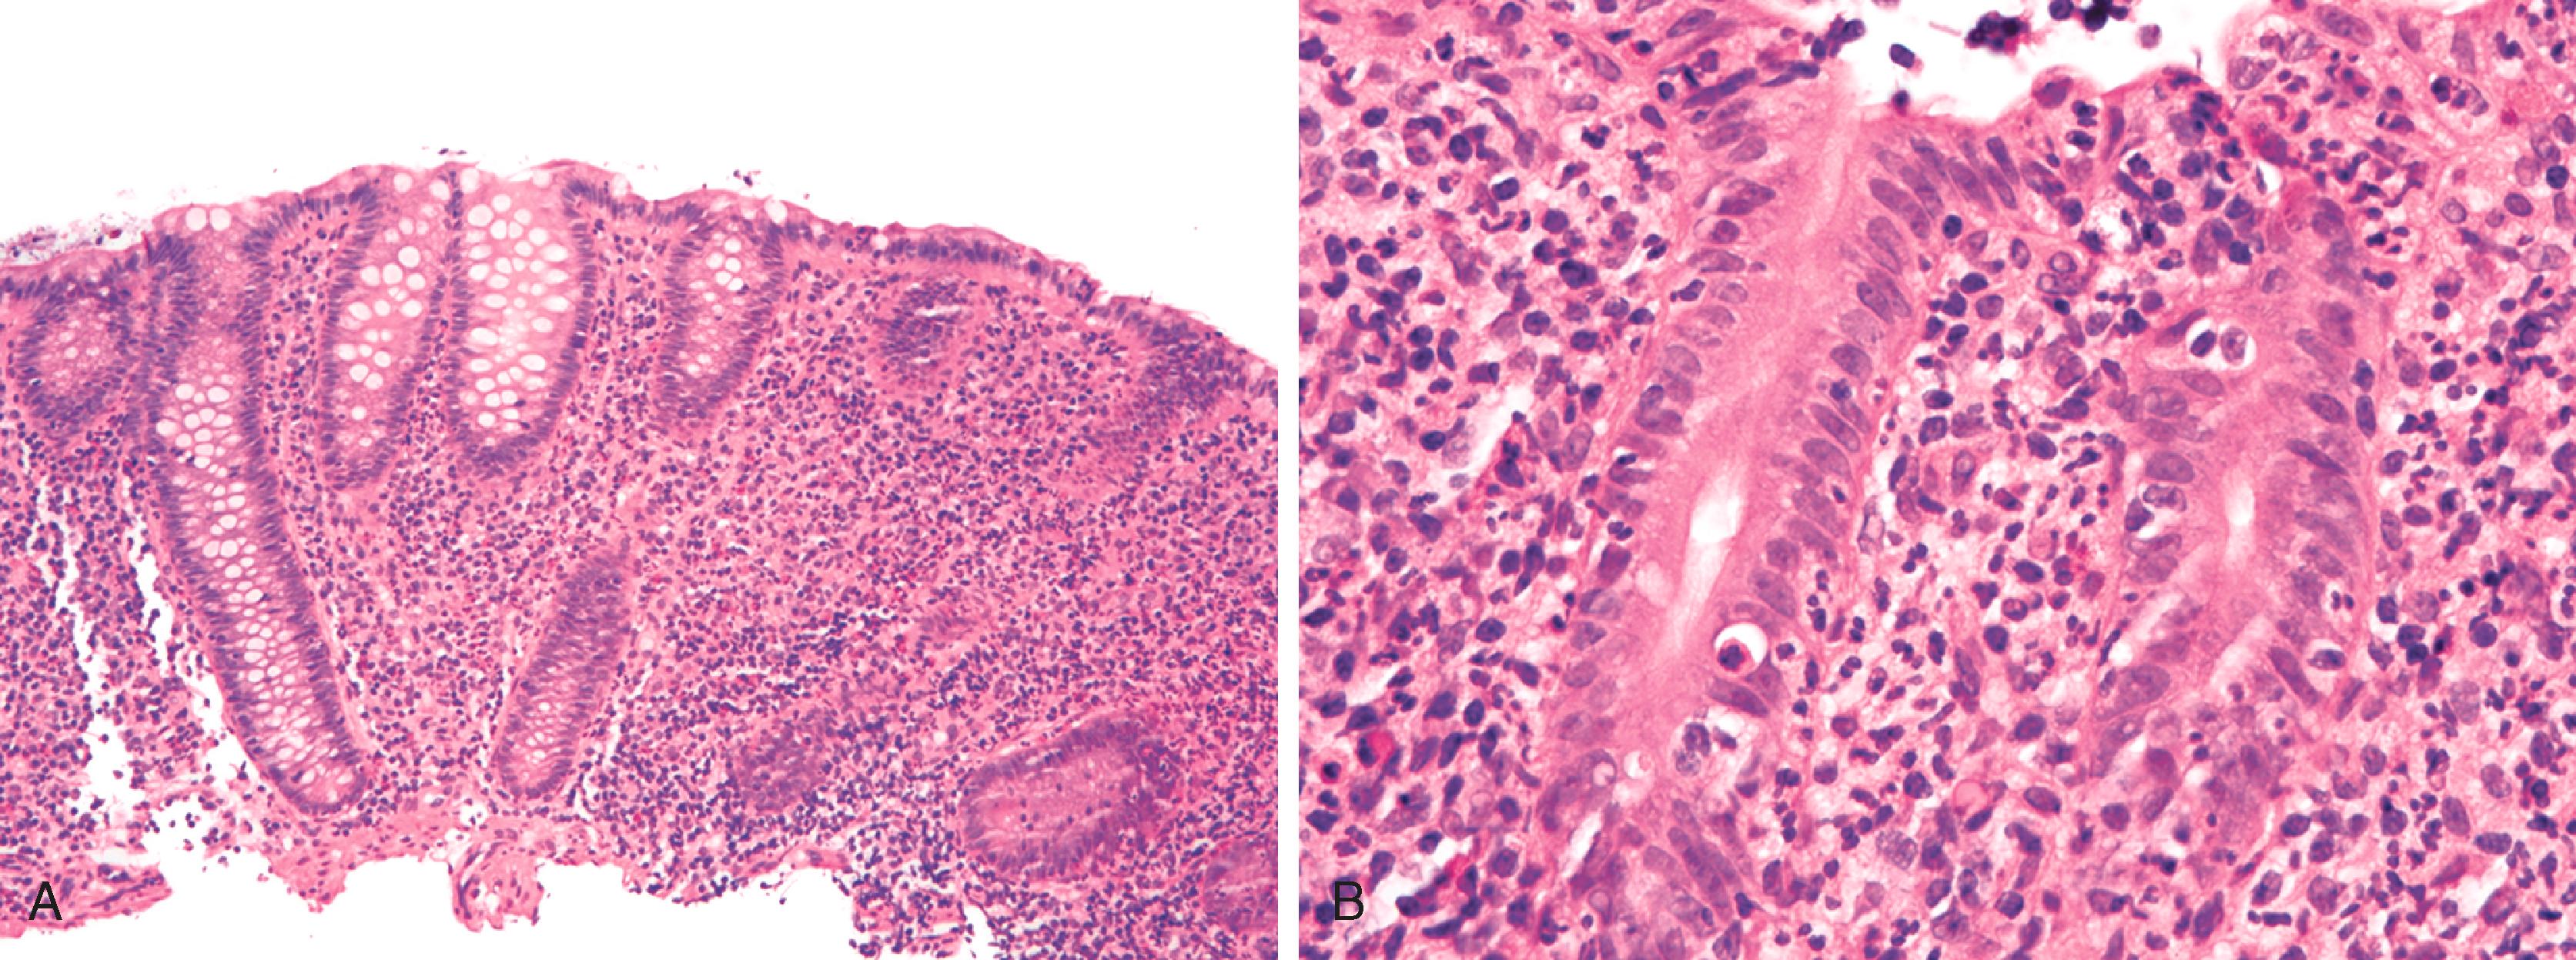 FIGURE 4.11, A, Acute self-limited colitis features increased lamina propria inflammation with preserved architecture. B, Neutrophil-rich inflammation is present in the lamina propria and infiltrating damaged crypts.